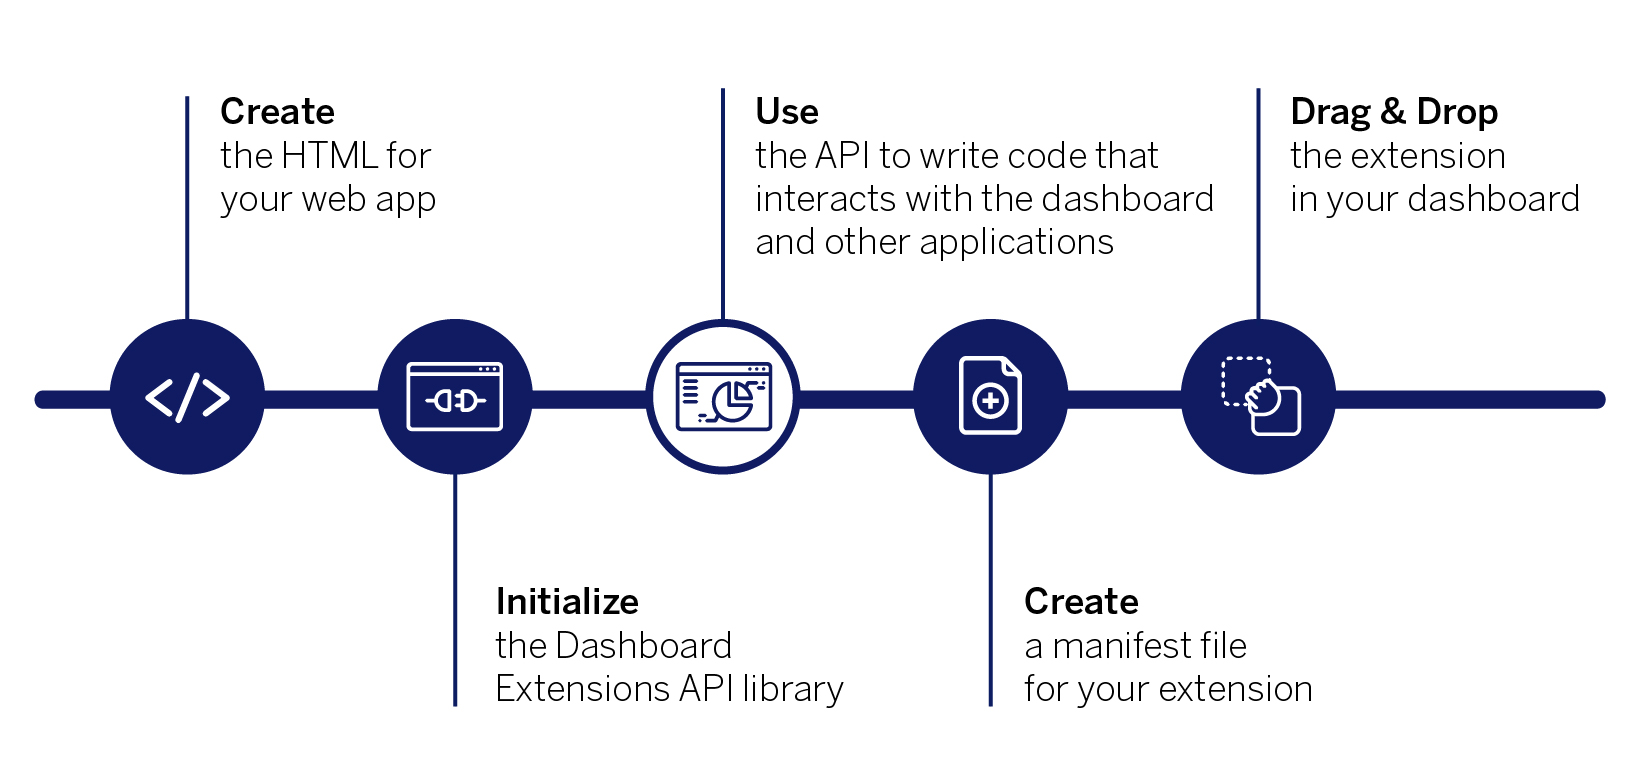 Use the API to write code that interacts with the dashboard and other applications